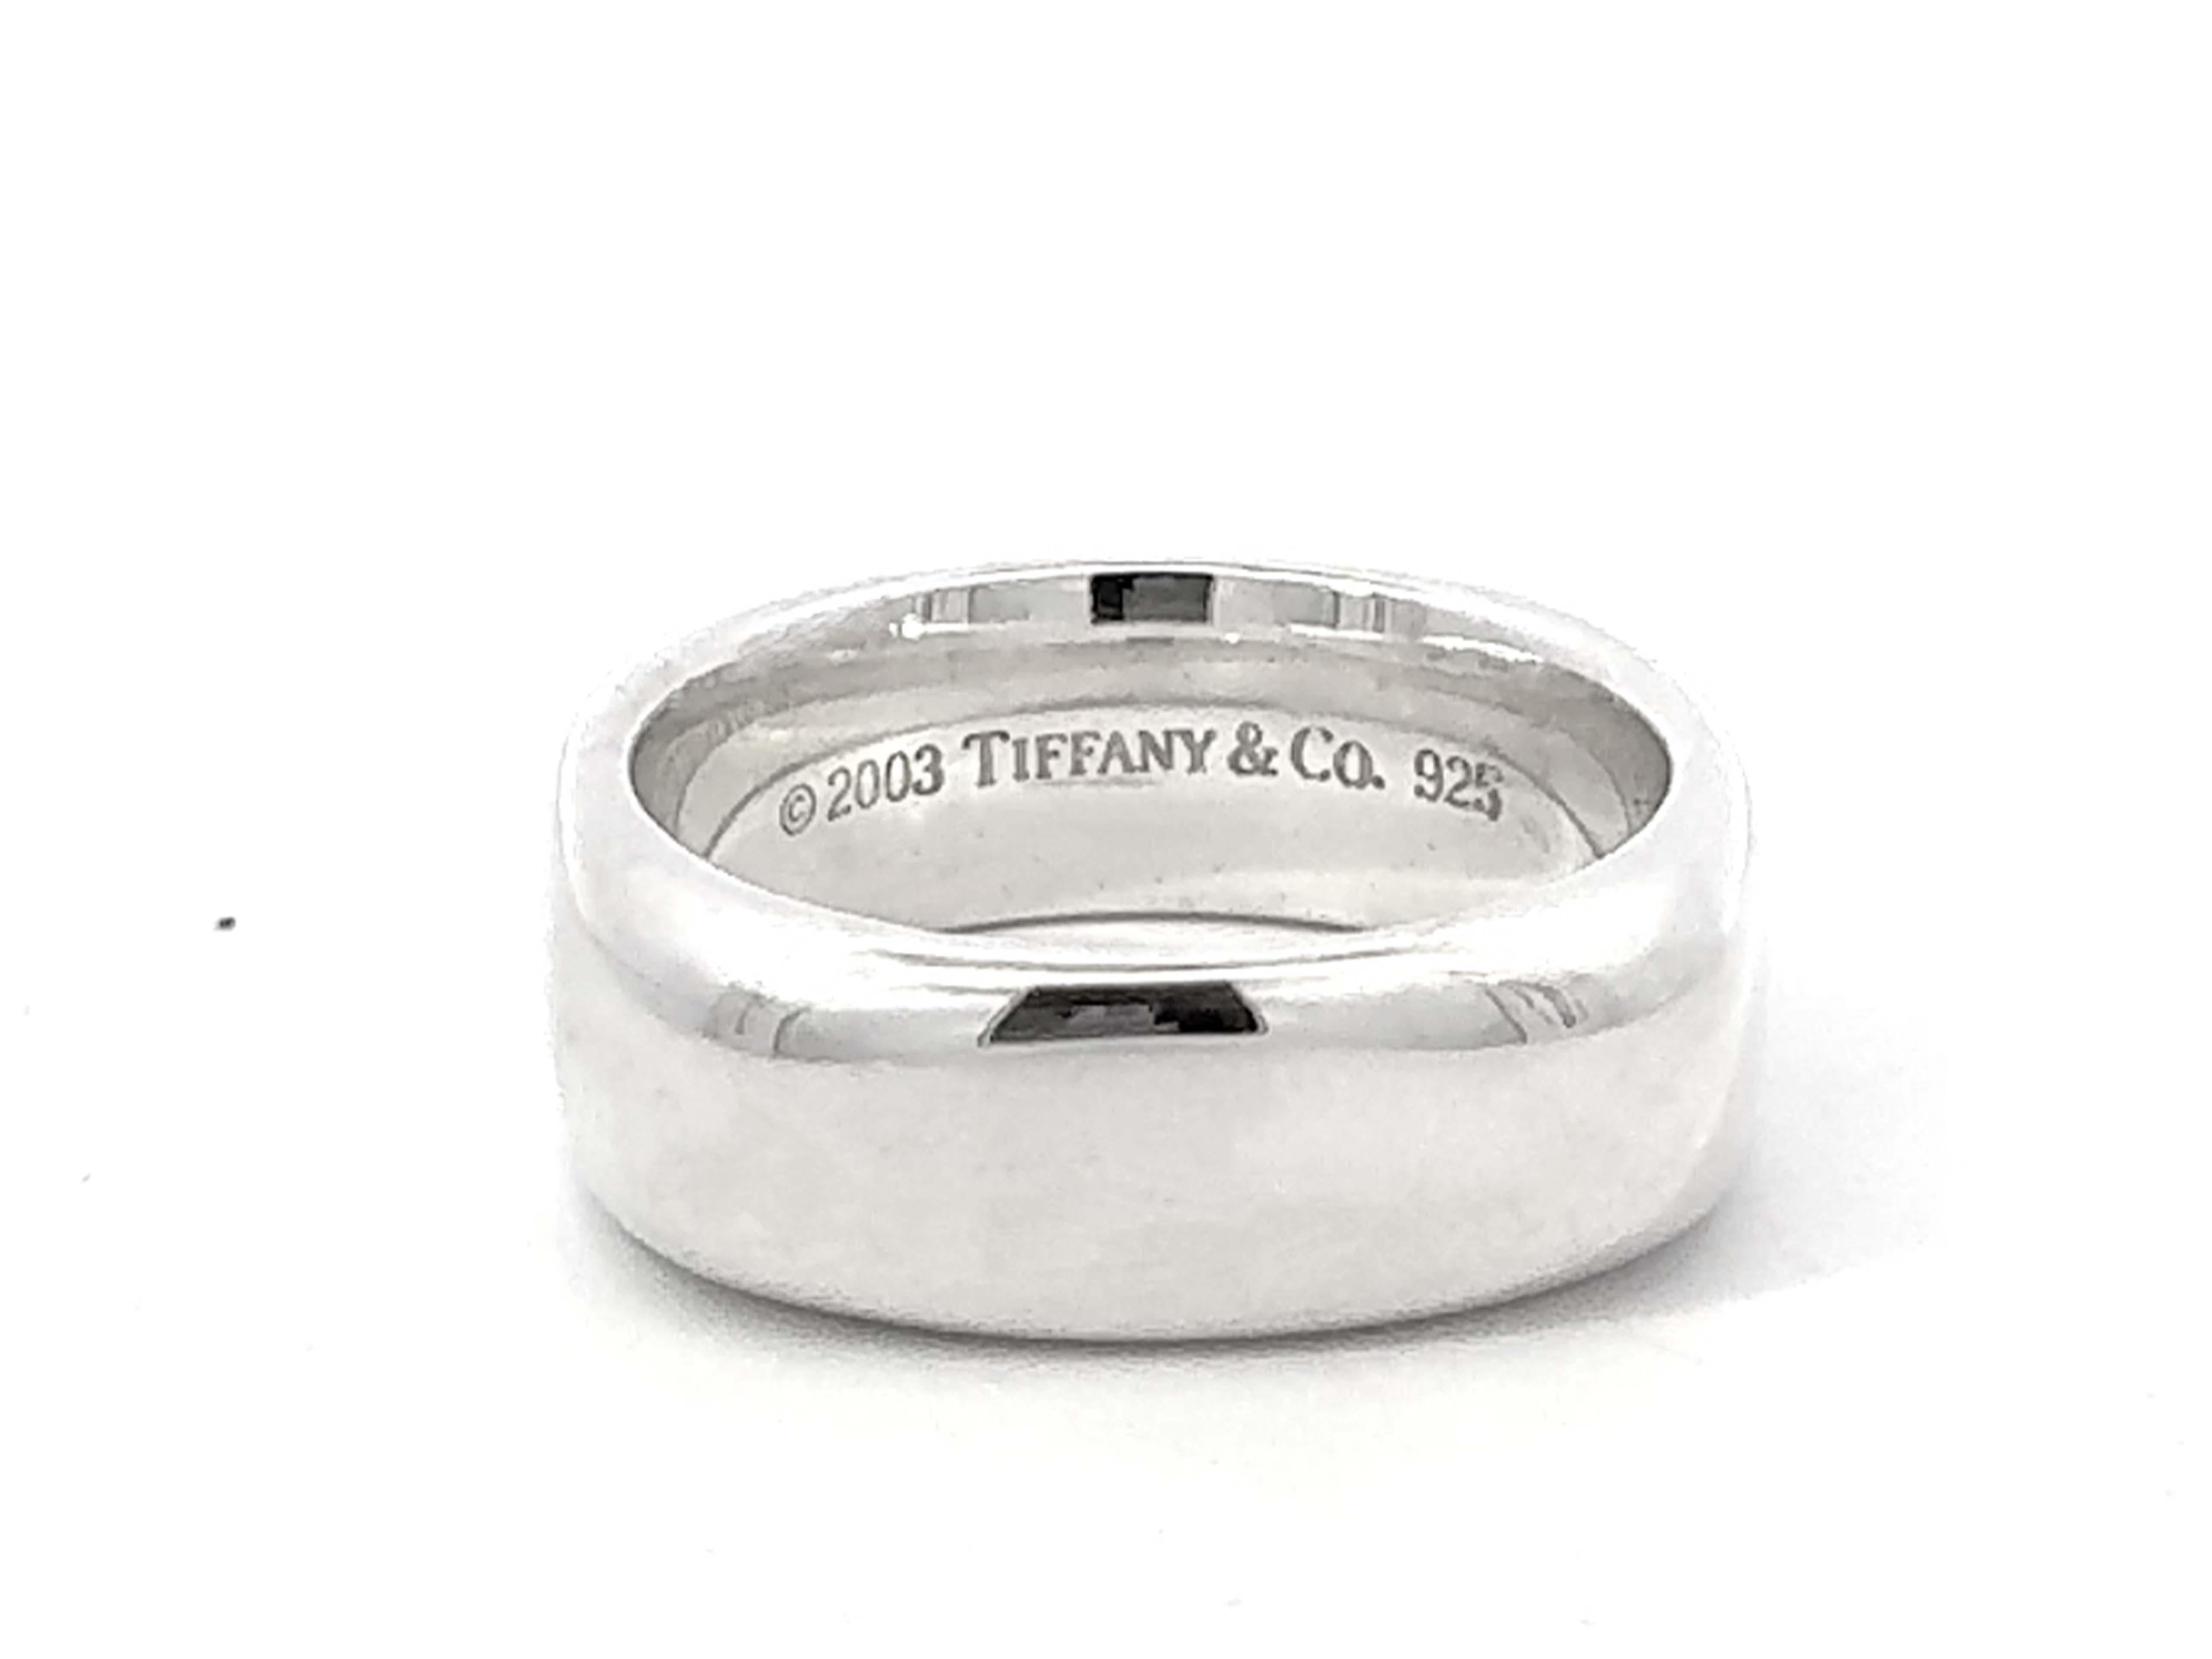 Tiffany & Co. 2003 Square Cushion Sterling Silver Ring For Sale 1